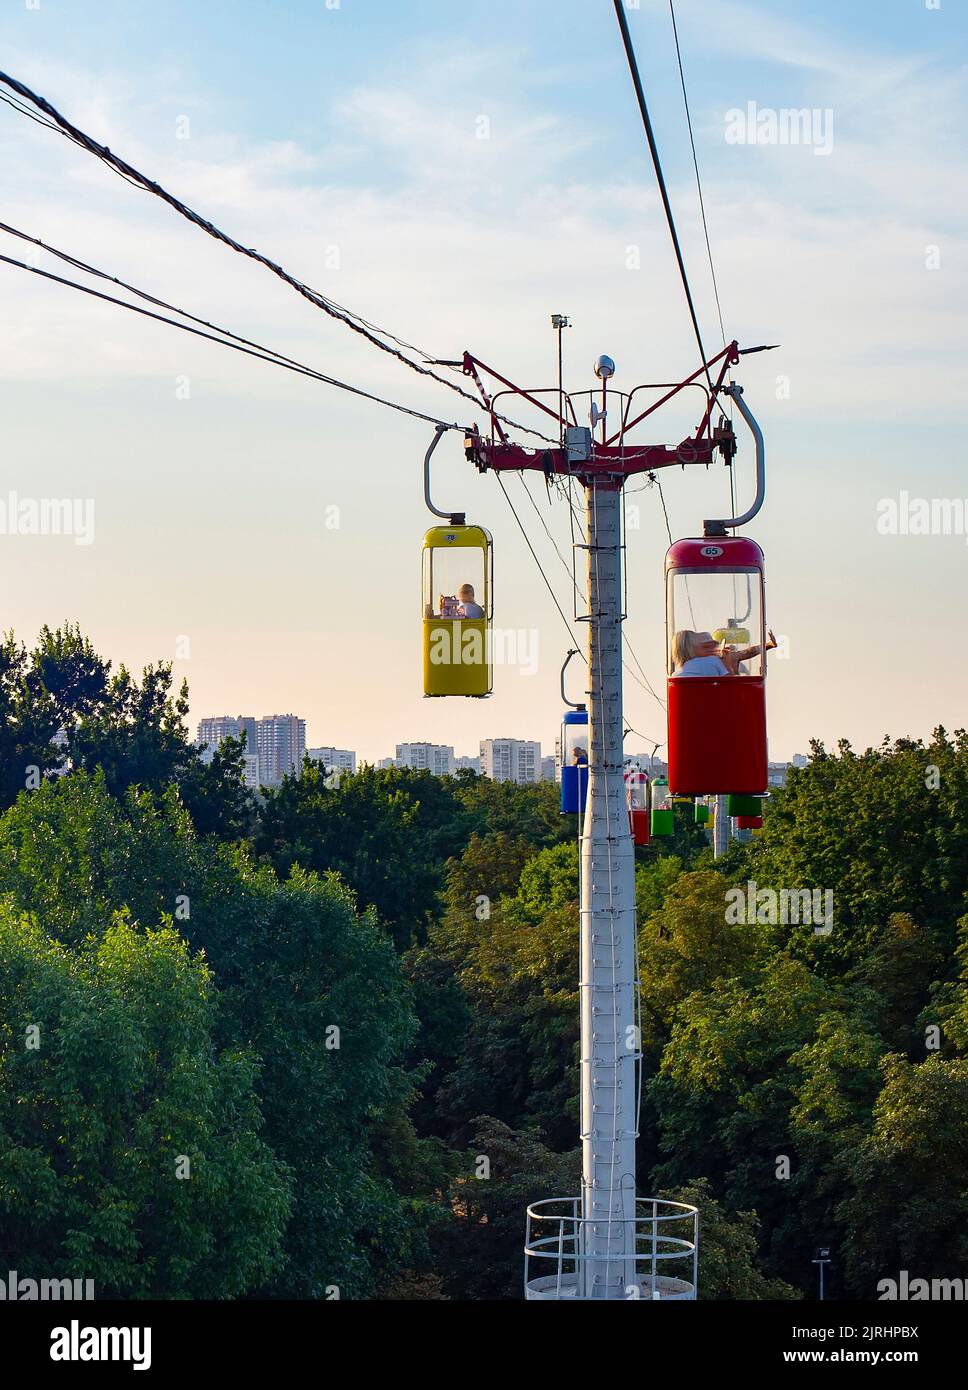 Colorful cableway over park with green trees at summer sunset, Kharkiv cityscape in background, Ukraine Stock Photo